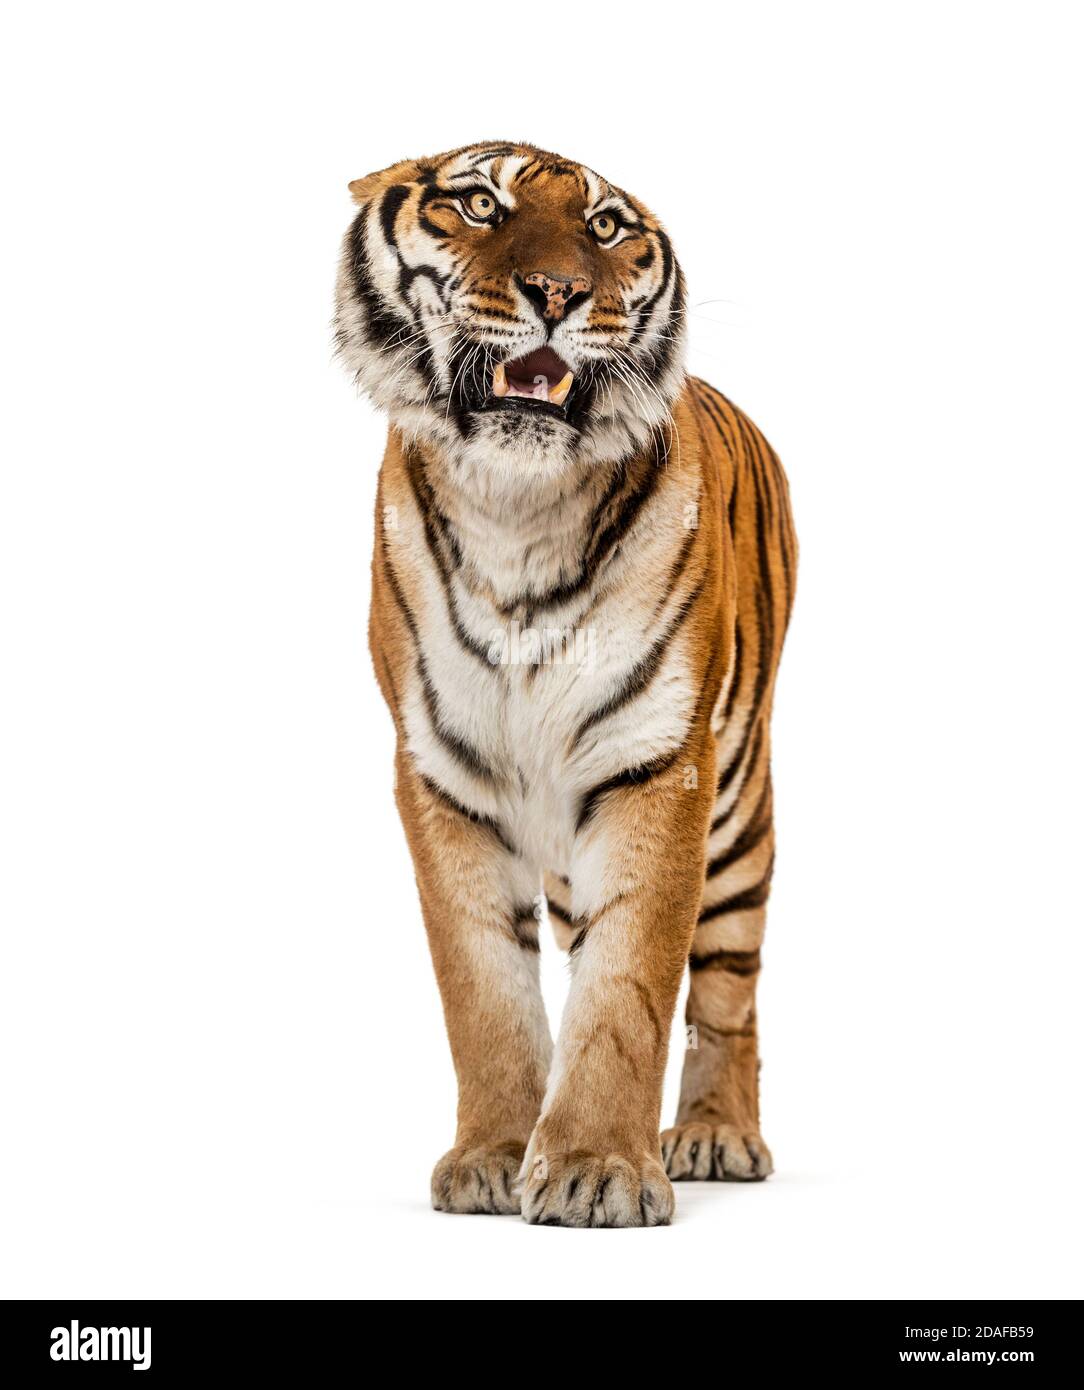 Angry Tiger showing teeth and looking angry Stock Photo